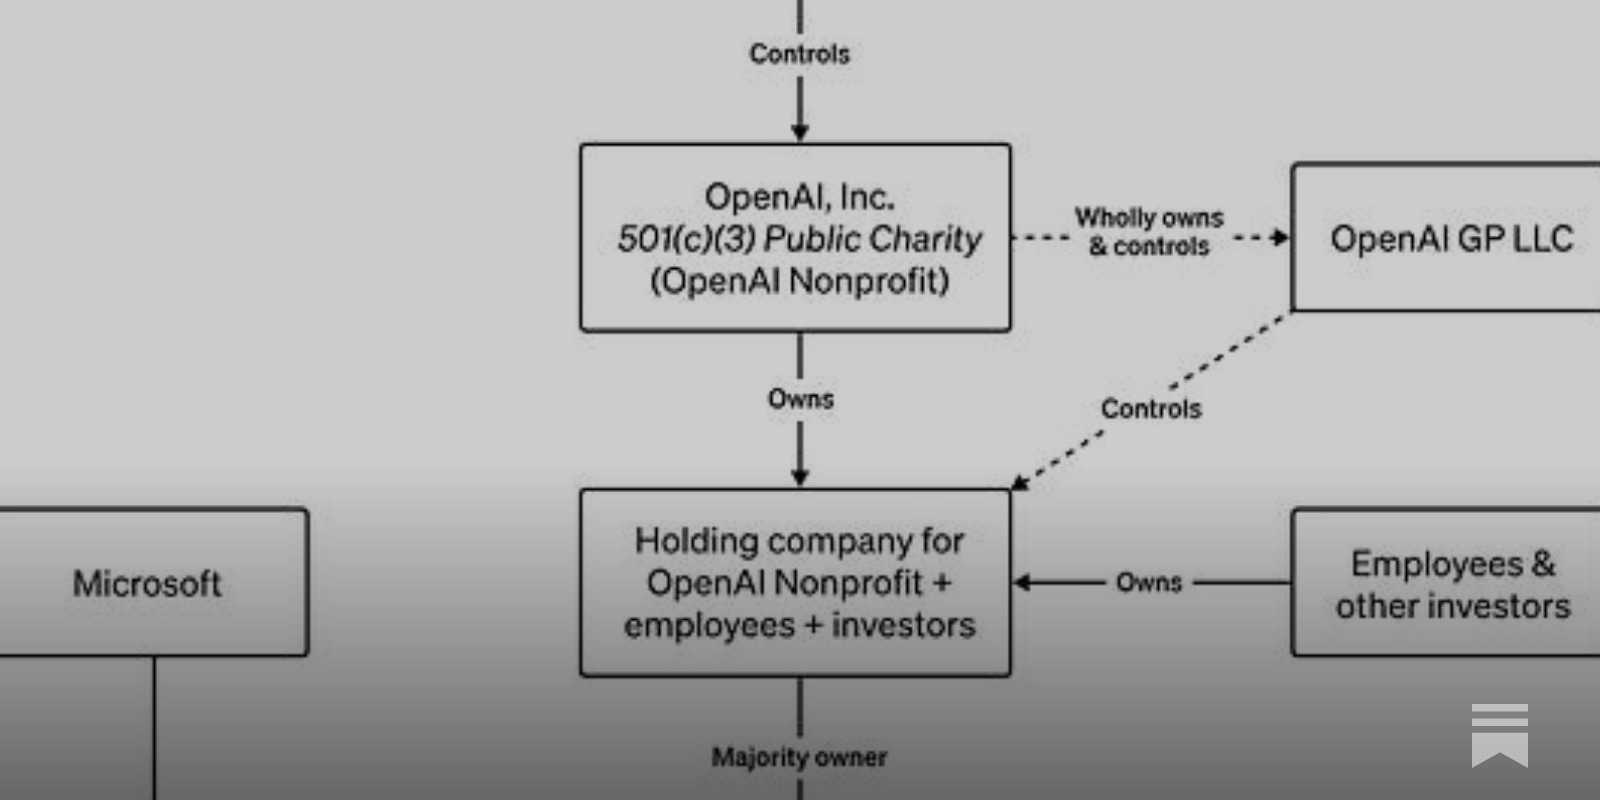 A brief look at the history of OpenAI's board